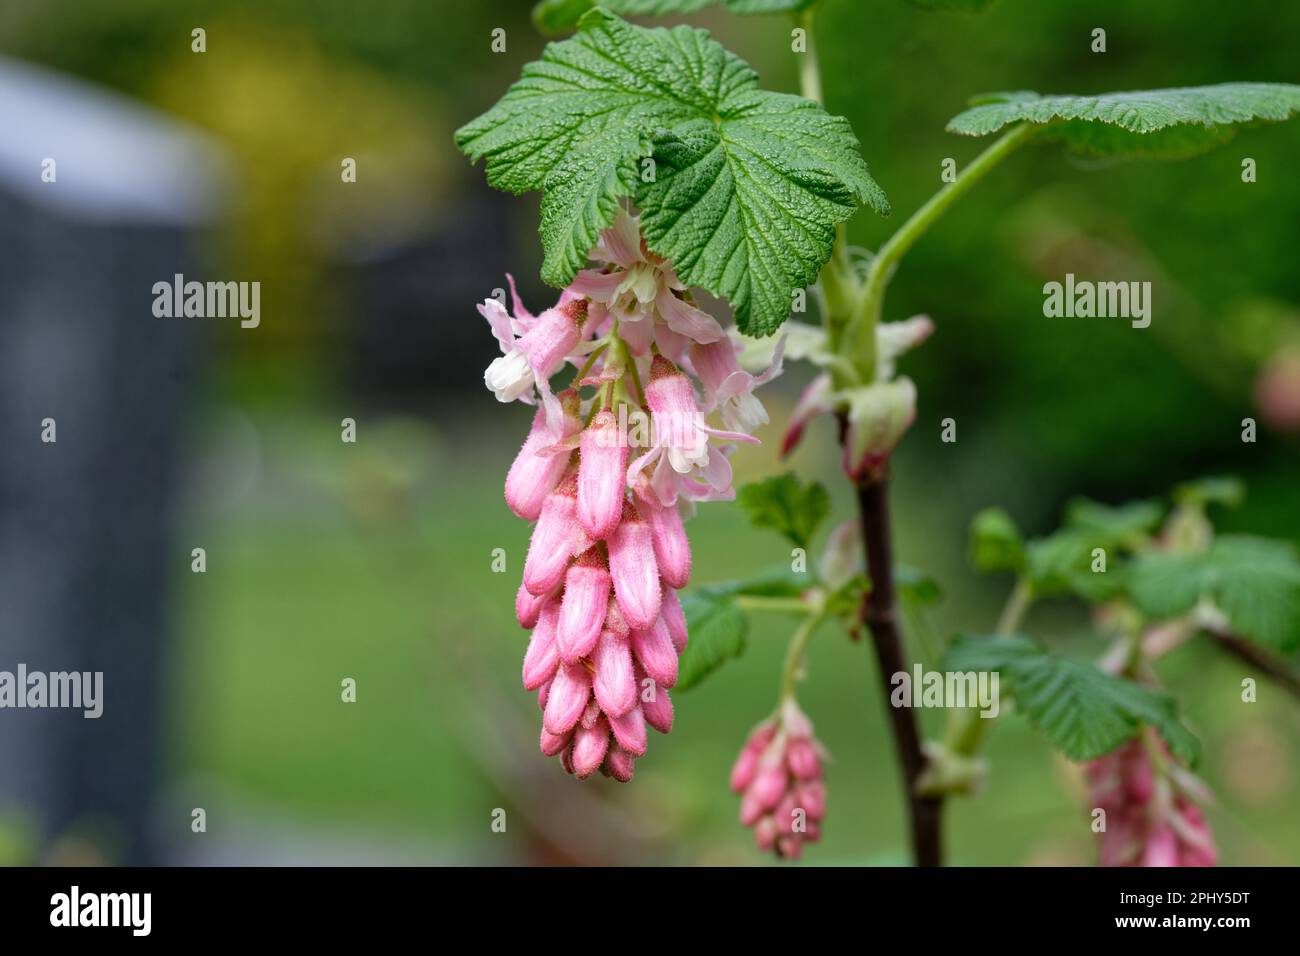 Ribes sanguineum inflorescence of a blood currant in a park against blurred background Stock Photo